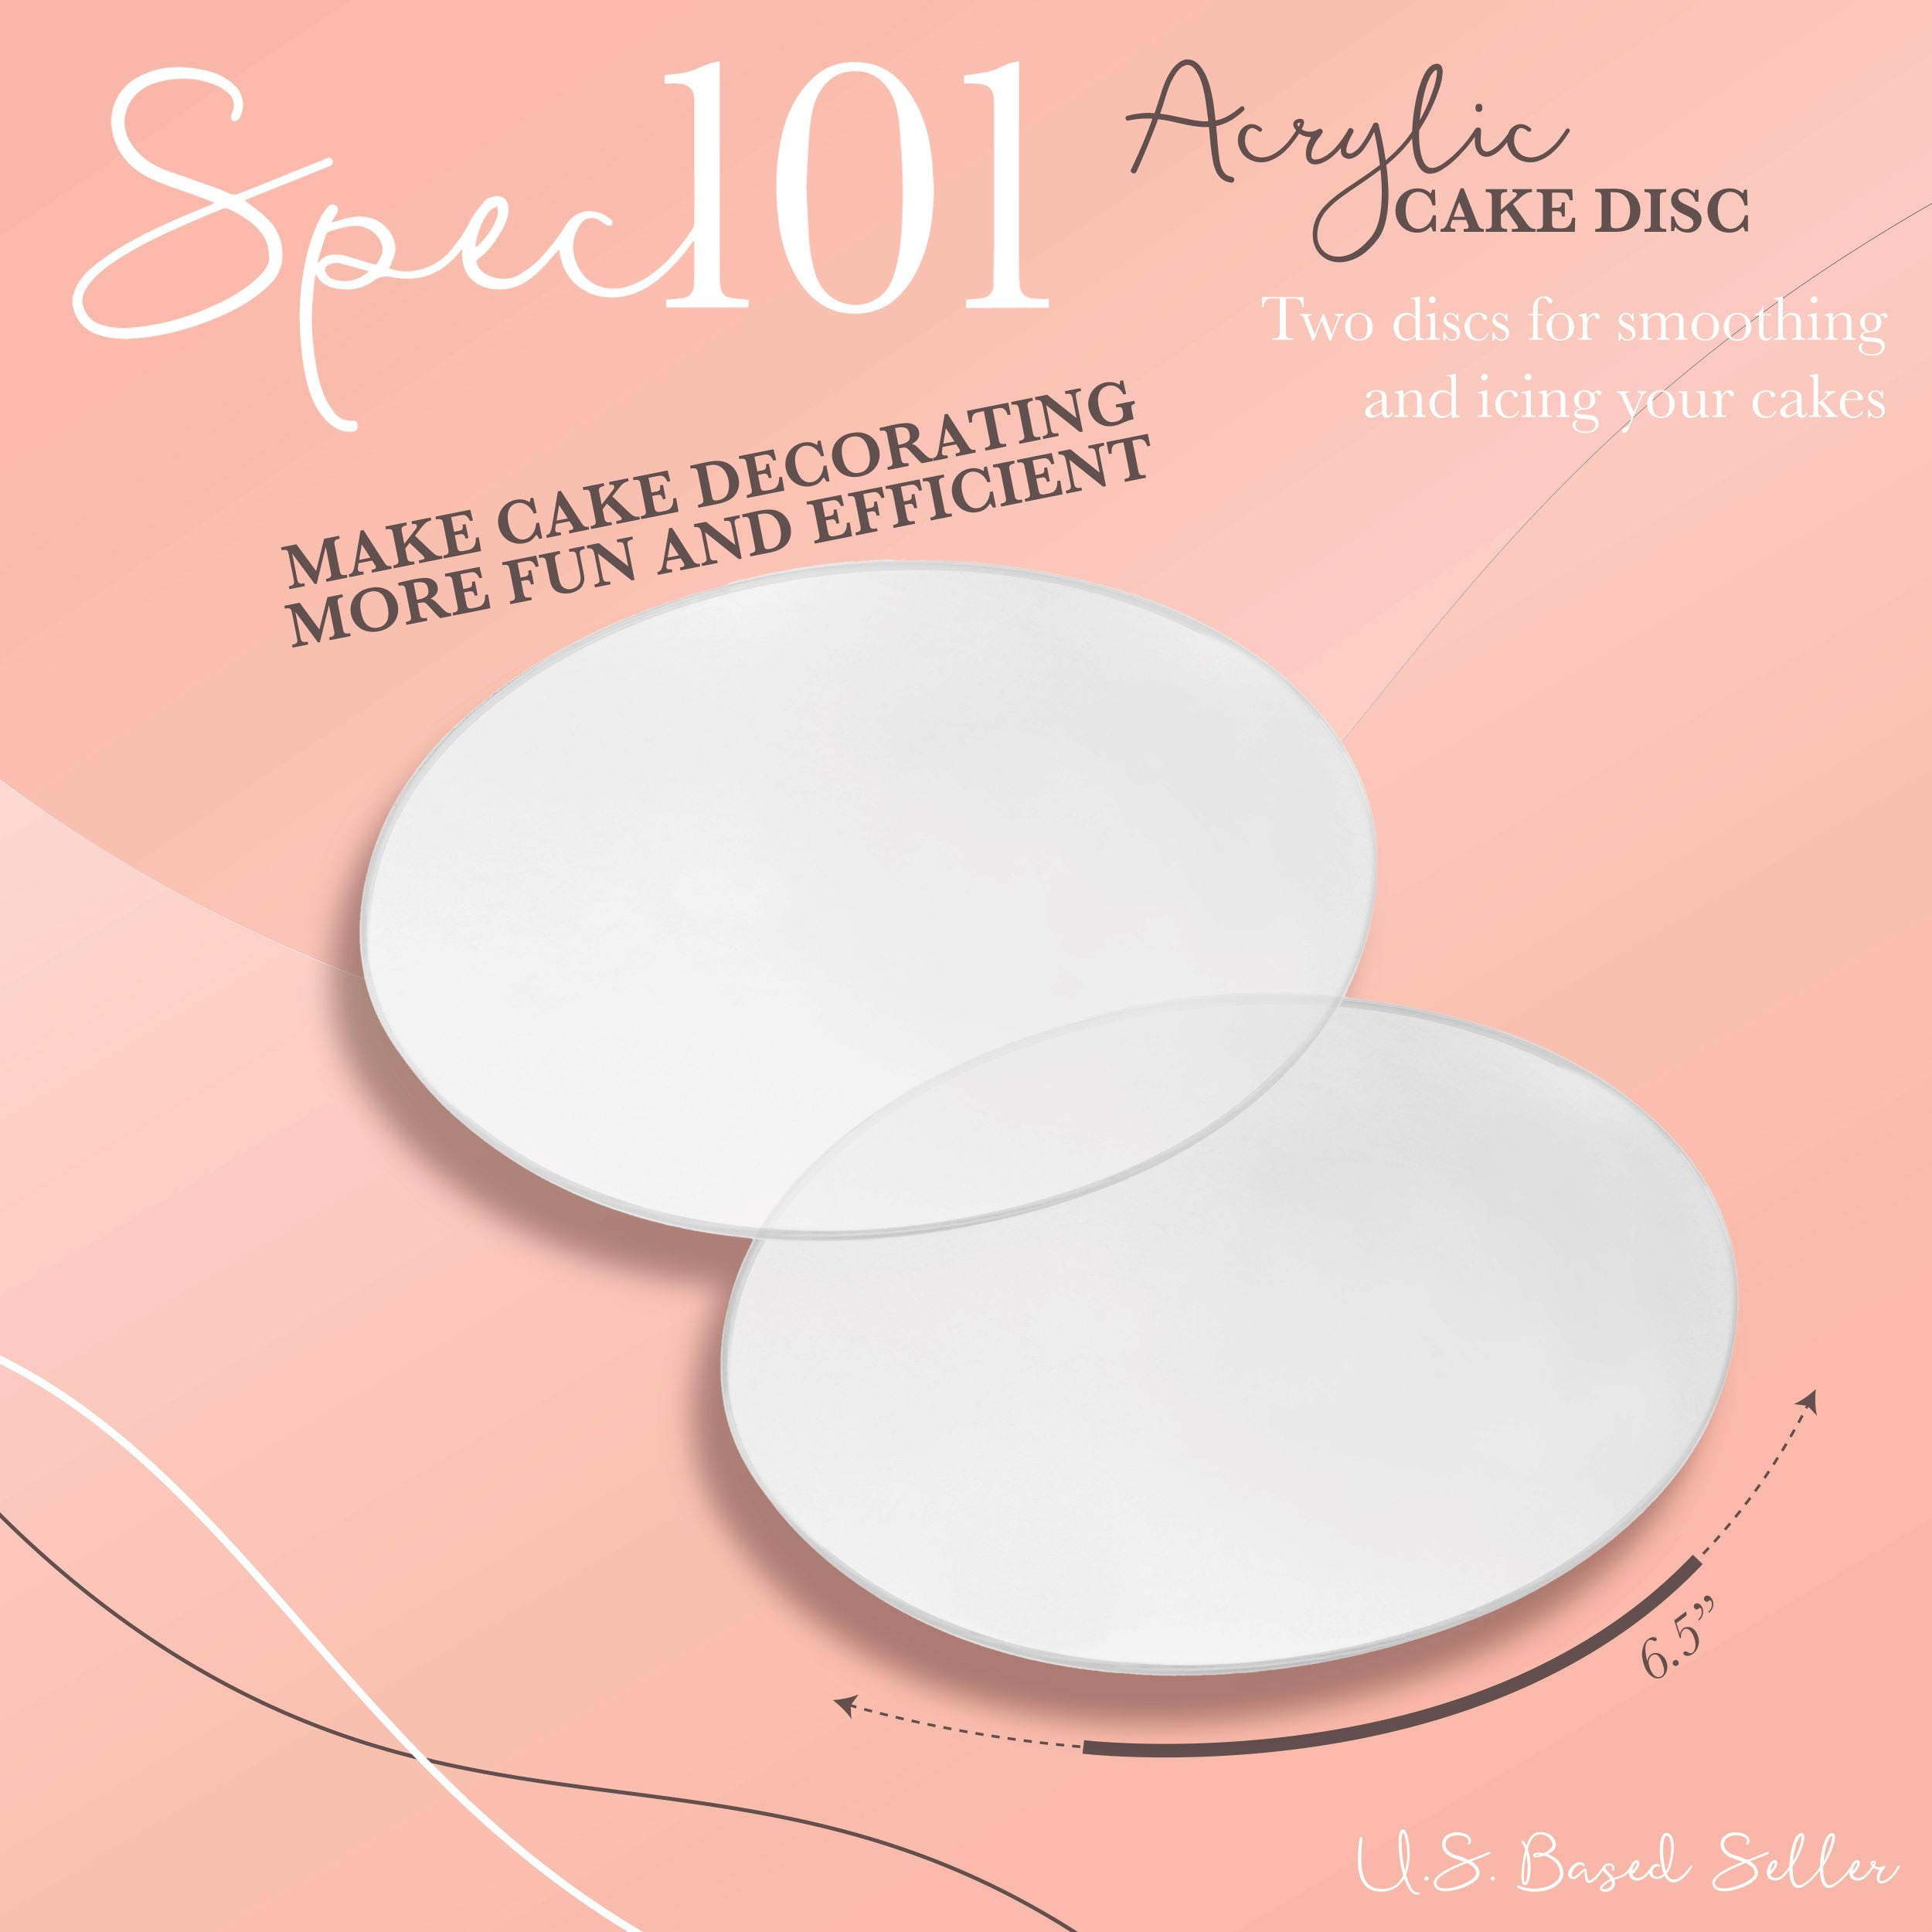 How Acrylic Cake Discs Make Your Cakes Look Professional